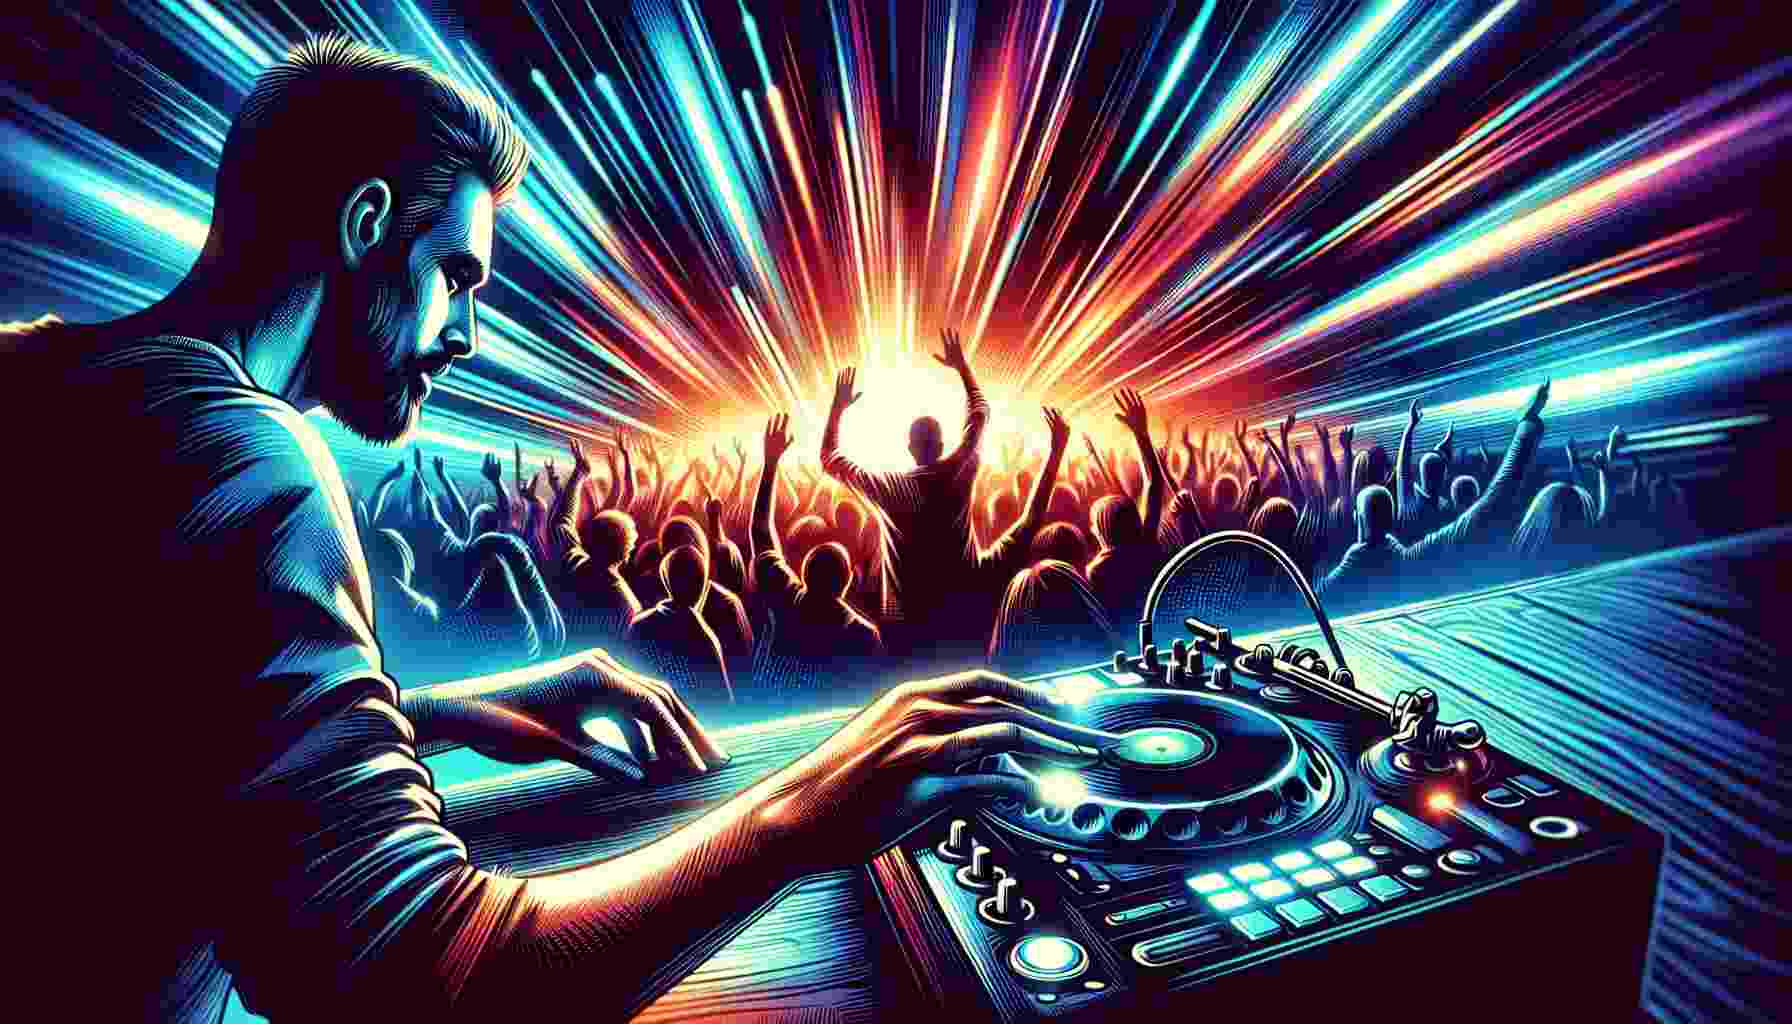 Illustration of a DJ performing at a music festival